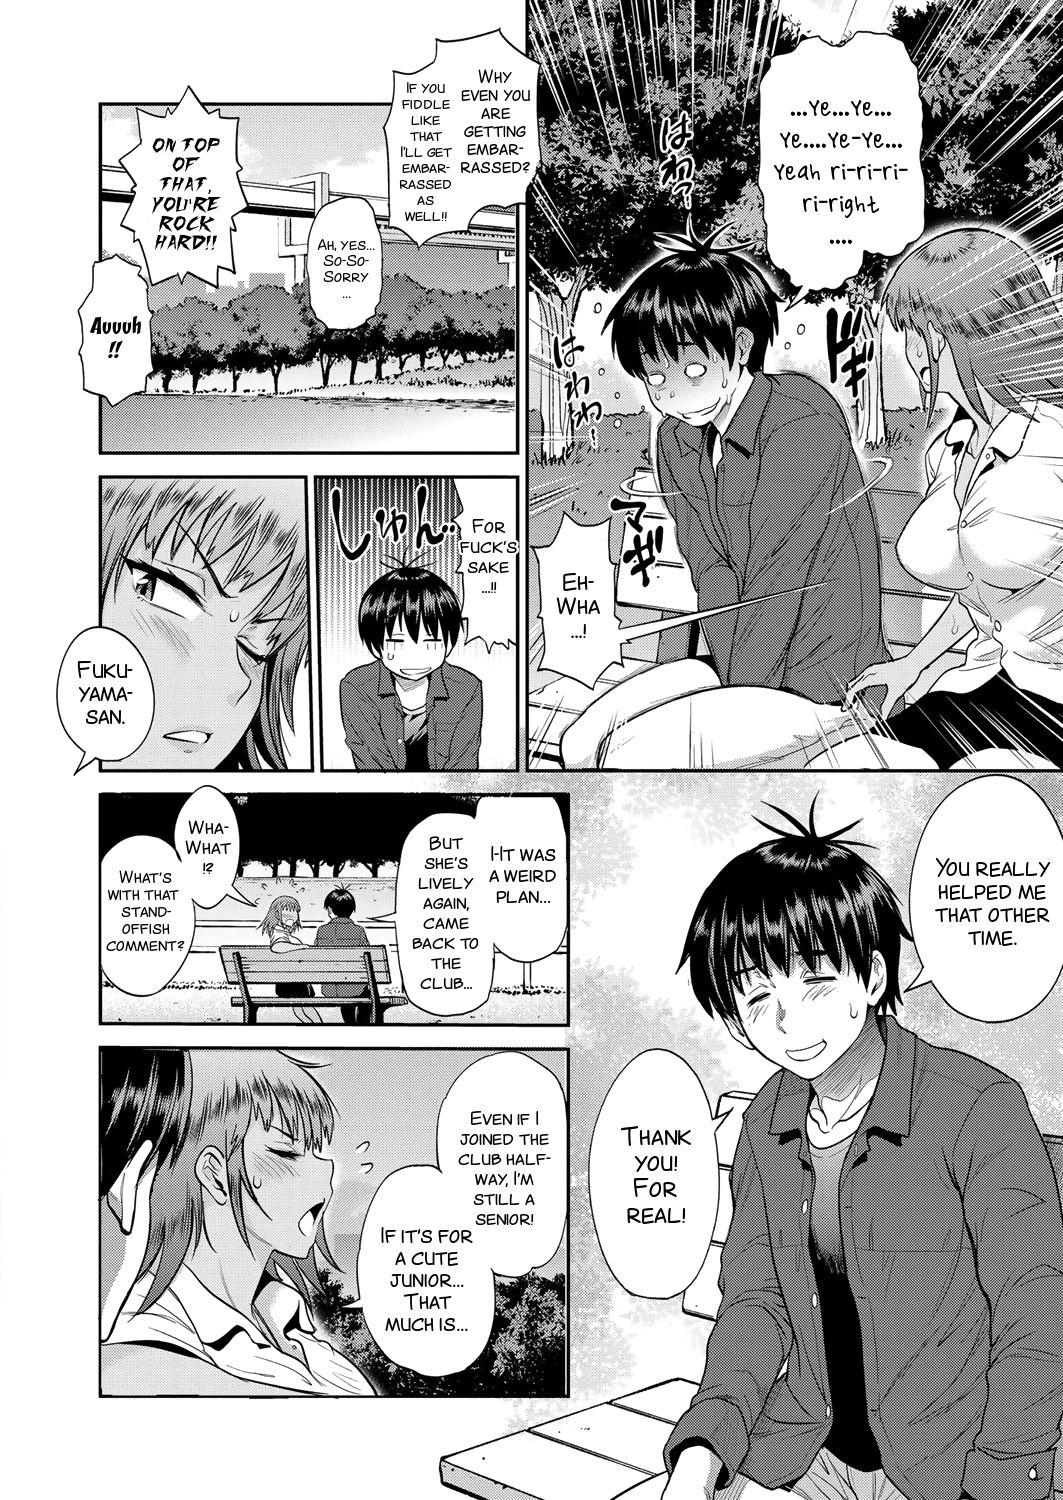 [DISTANCE] Joshi Luck! ~2 Years Later~ Ch. 7-8.5 [English] [SMDC] [Digital] 79